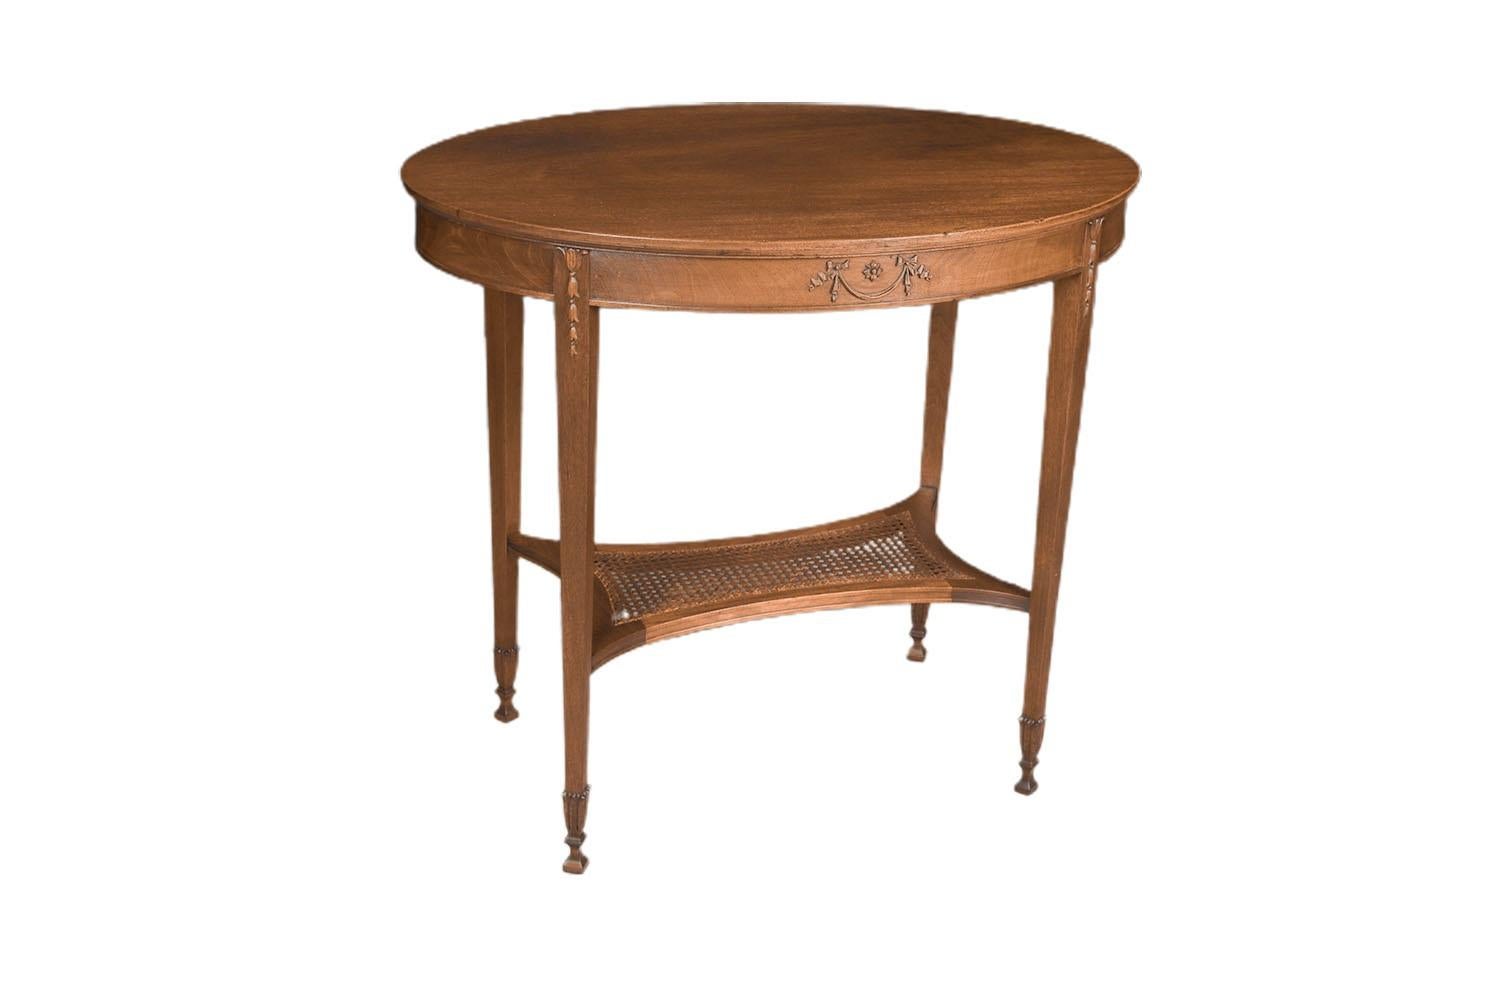 Antique English Hepplewhite Carved Bellflower Mahogany Caned Oval Side Table In Good Condition For Sale In Baltimore, MD